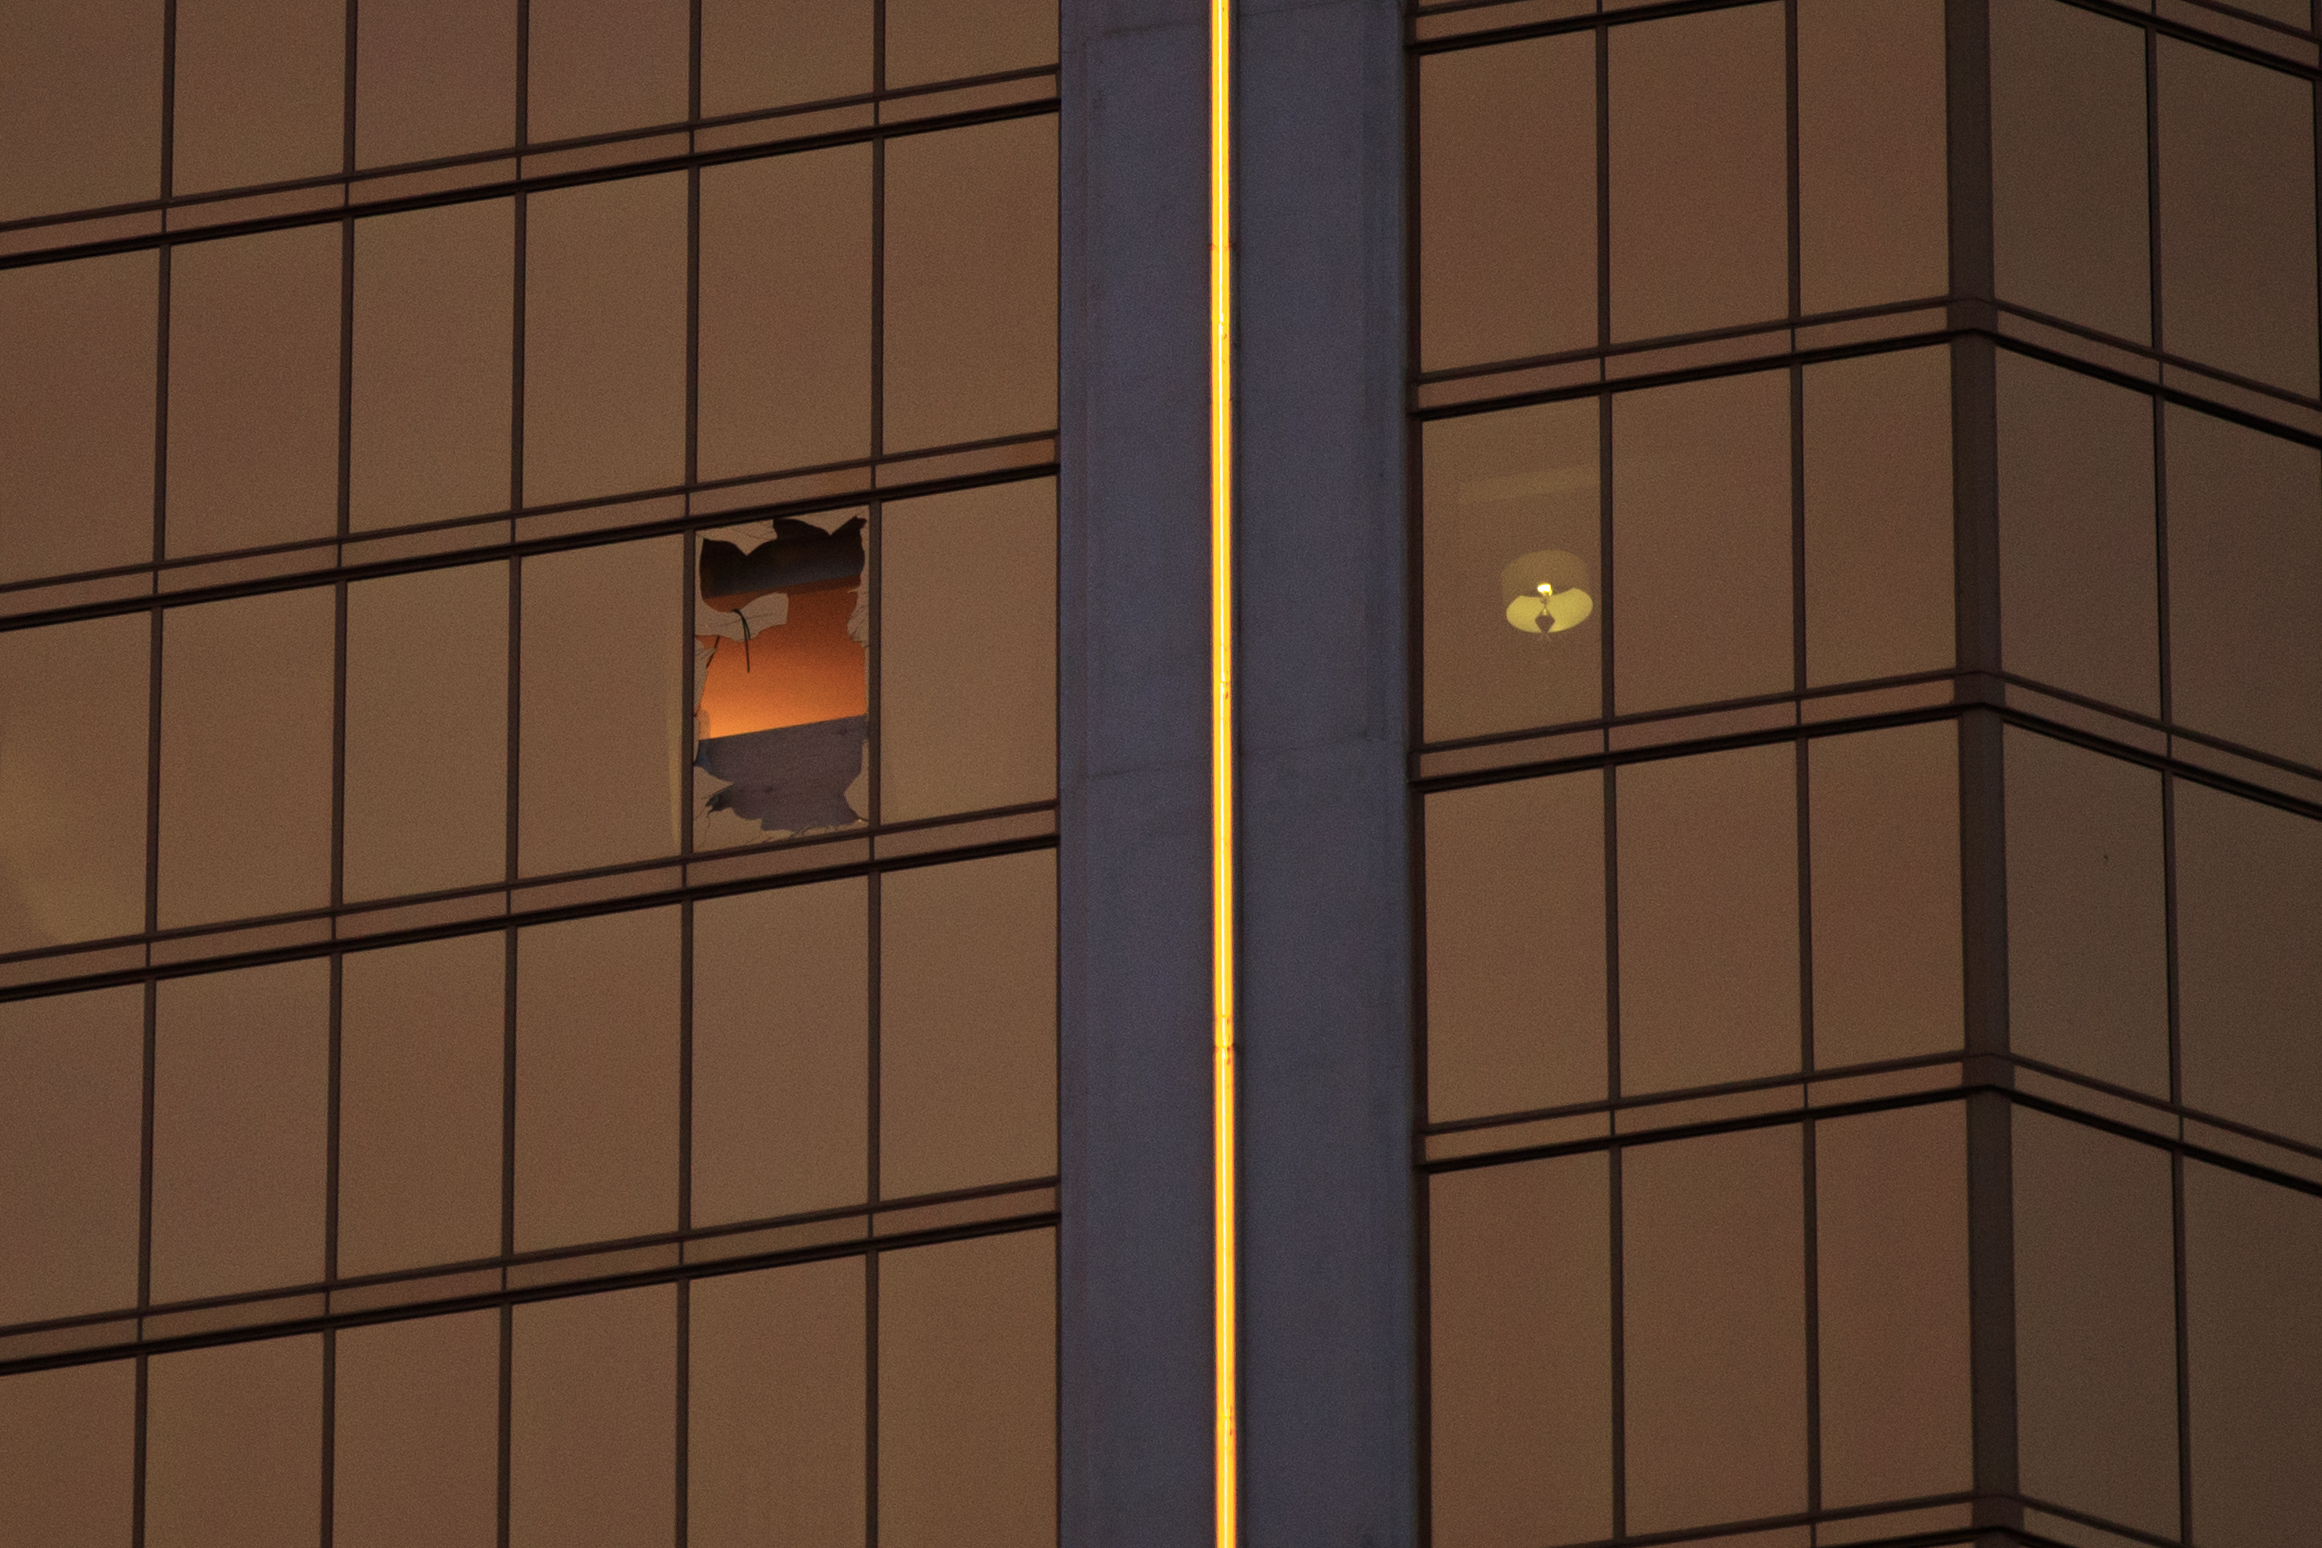 A window is broken on the 32nd floor of the Mandalay Bay Resort and Casino